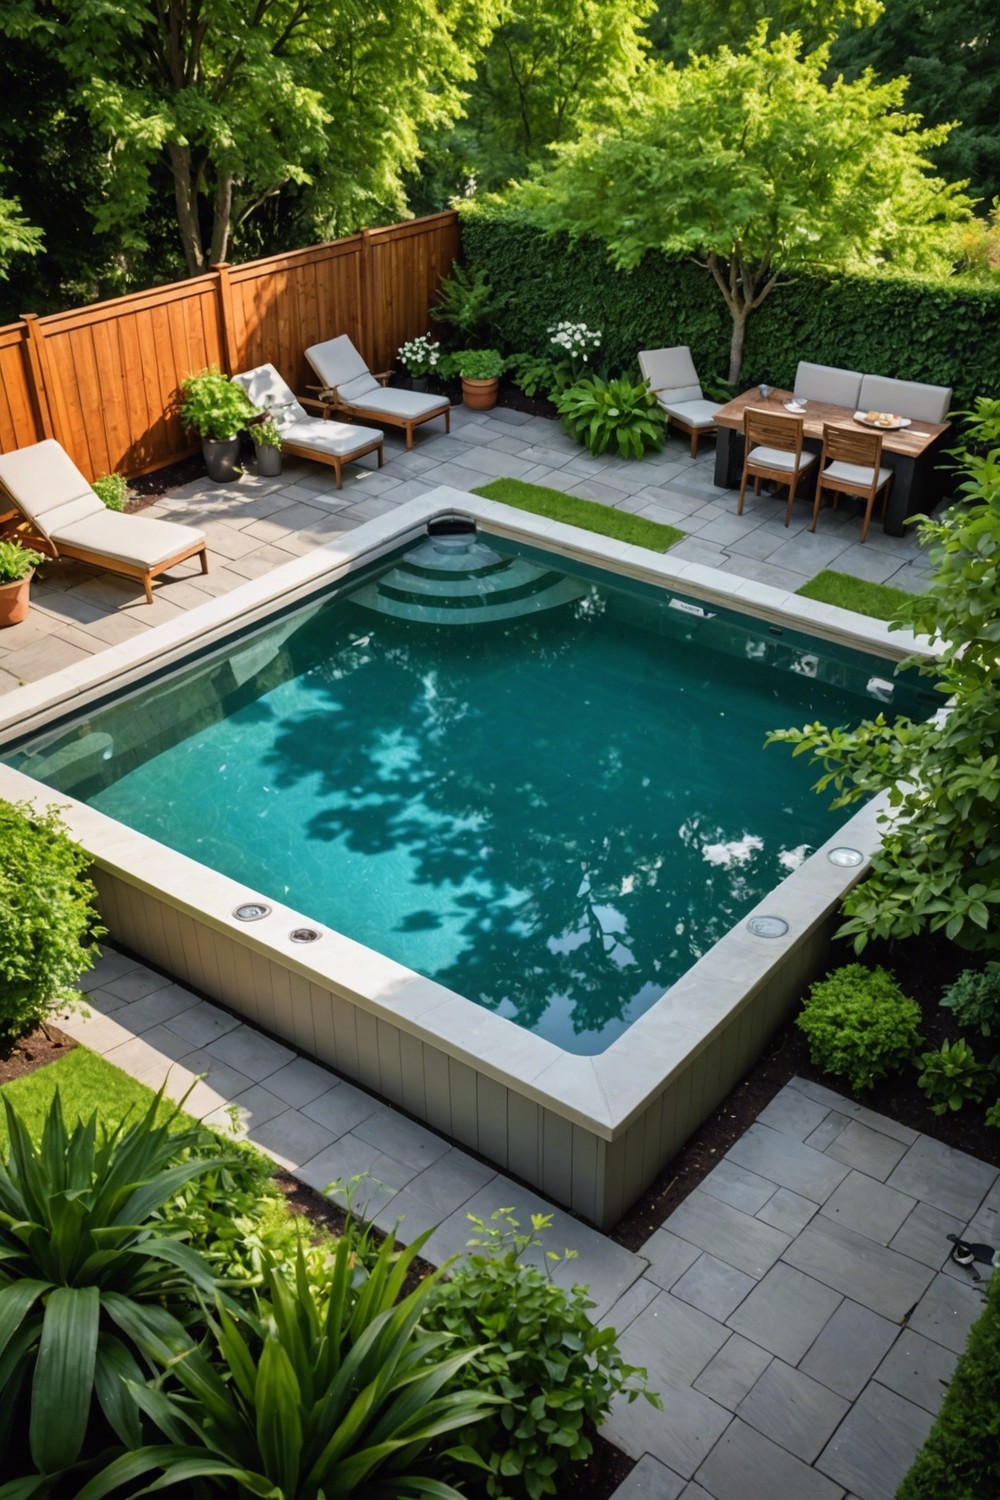 Endless Pool Models for Small Yards